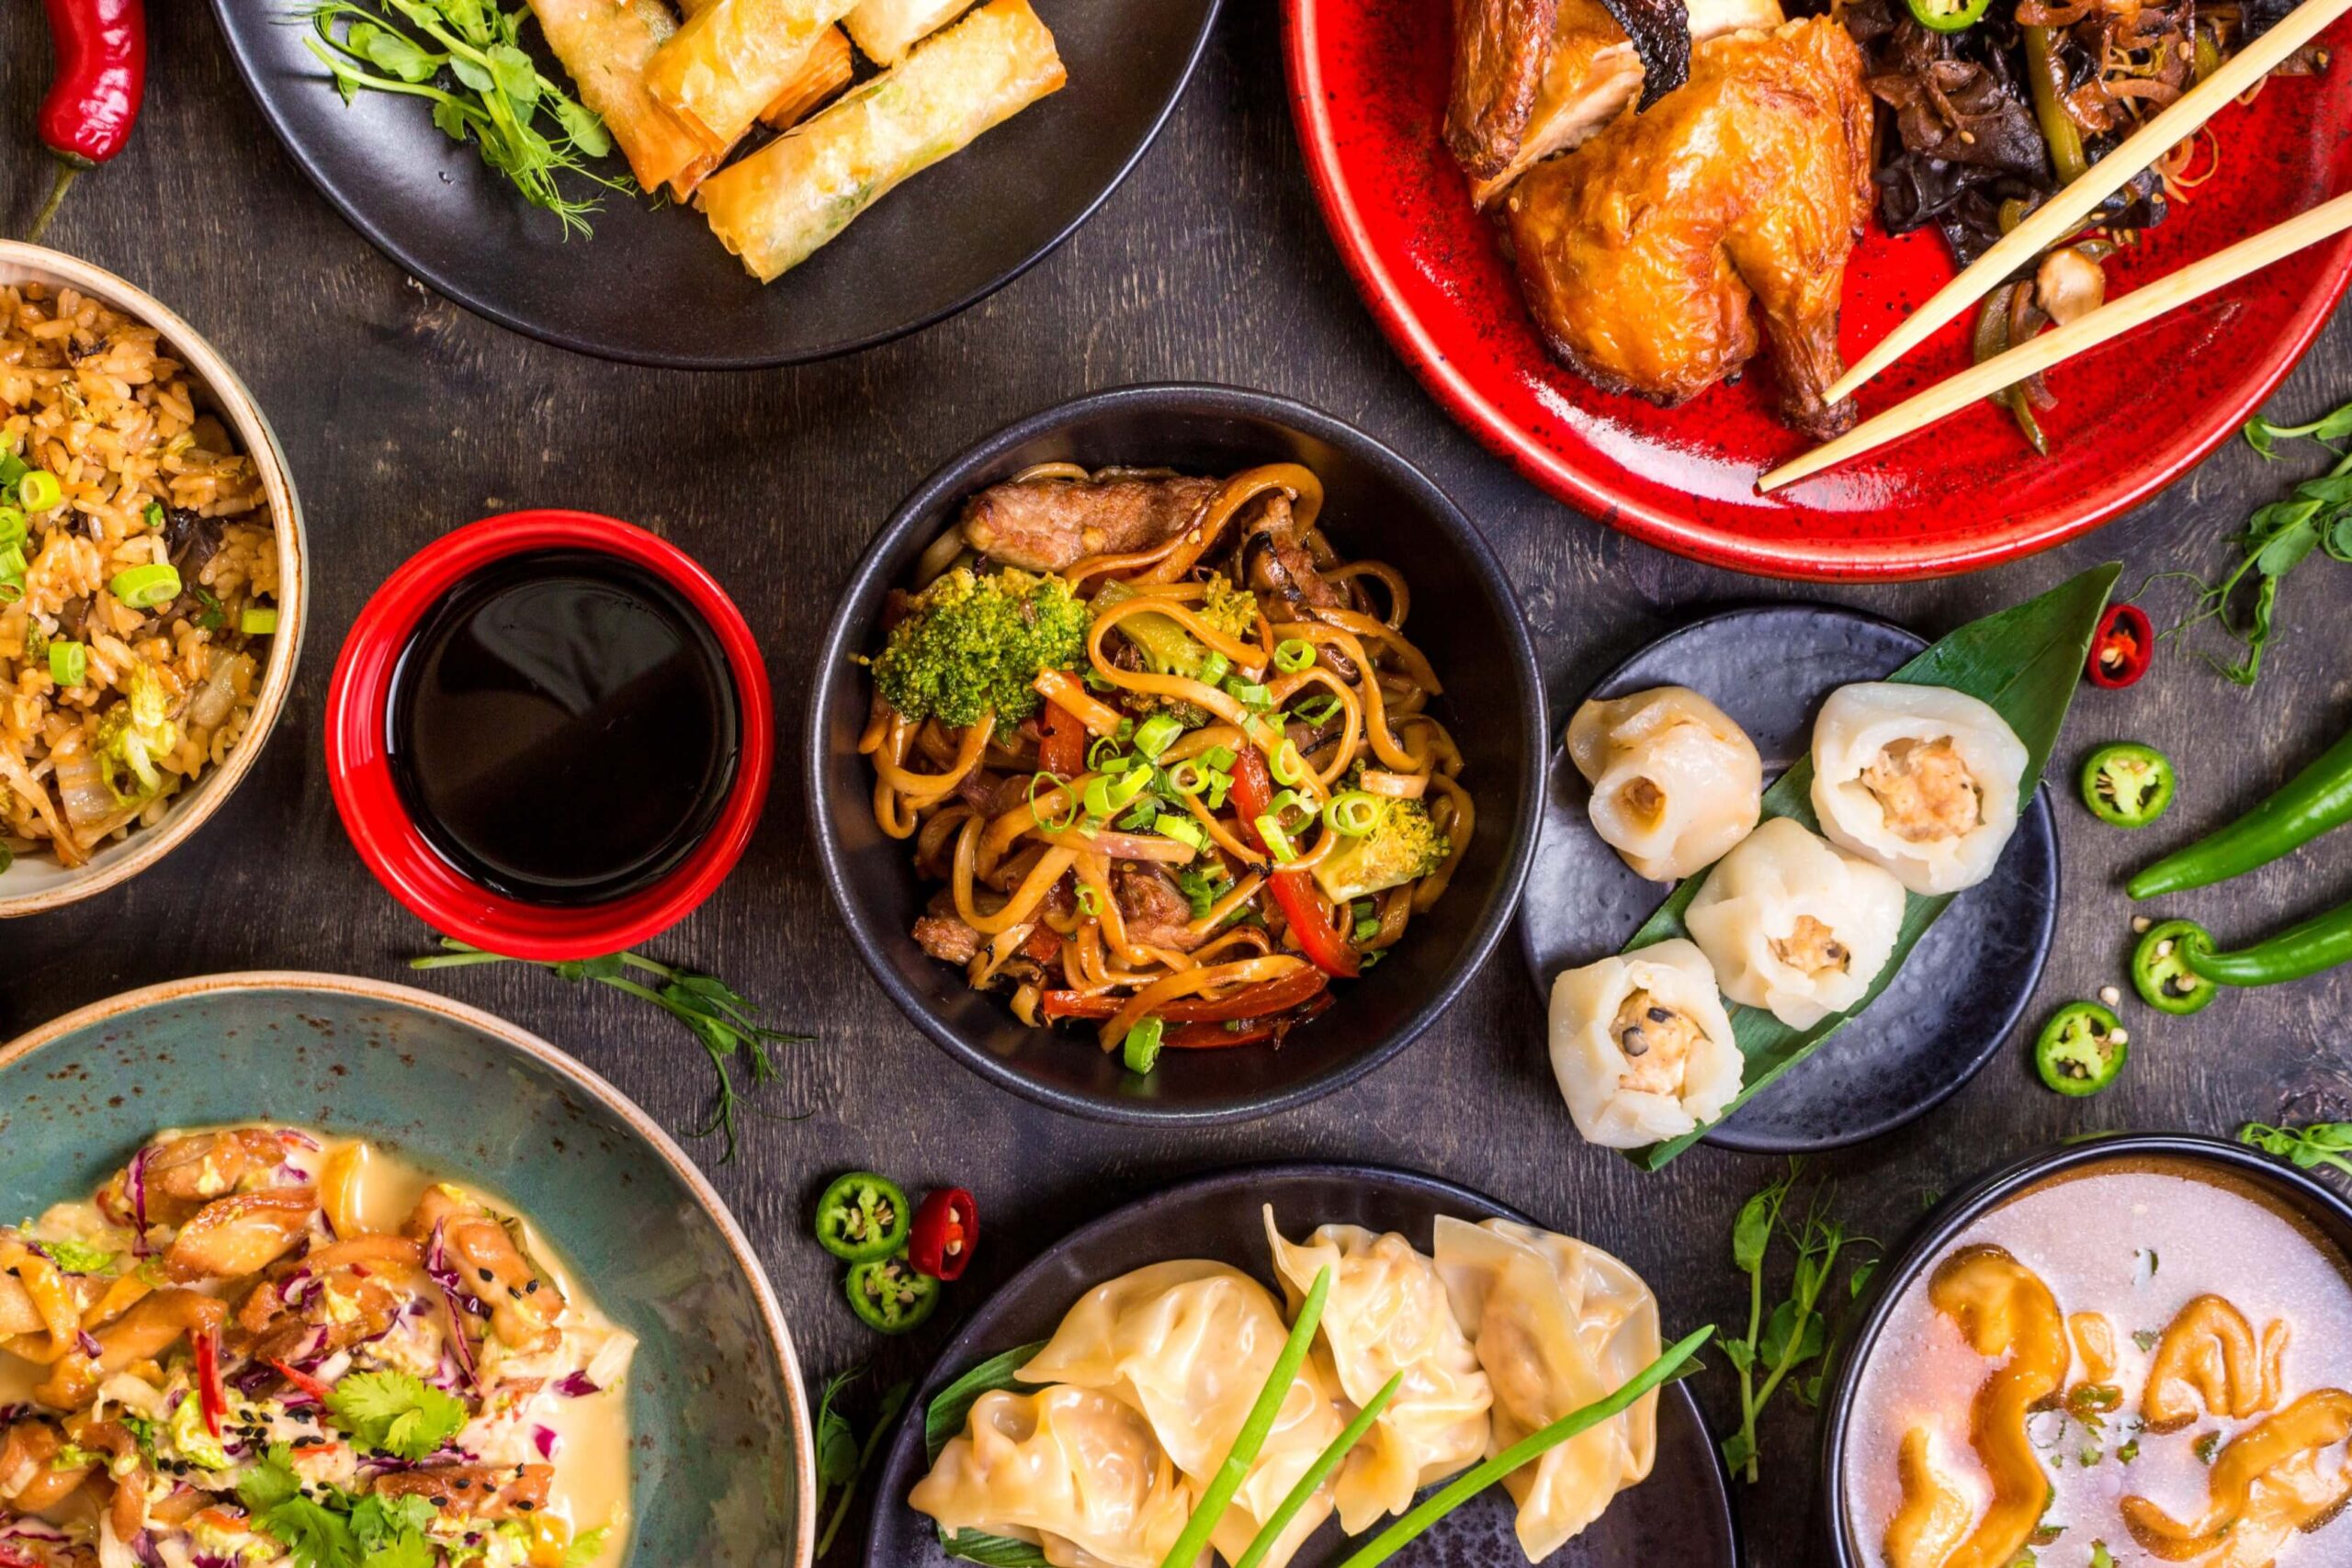 The Best Chinese Food Restaurants In Bend, Oregon